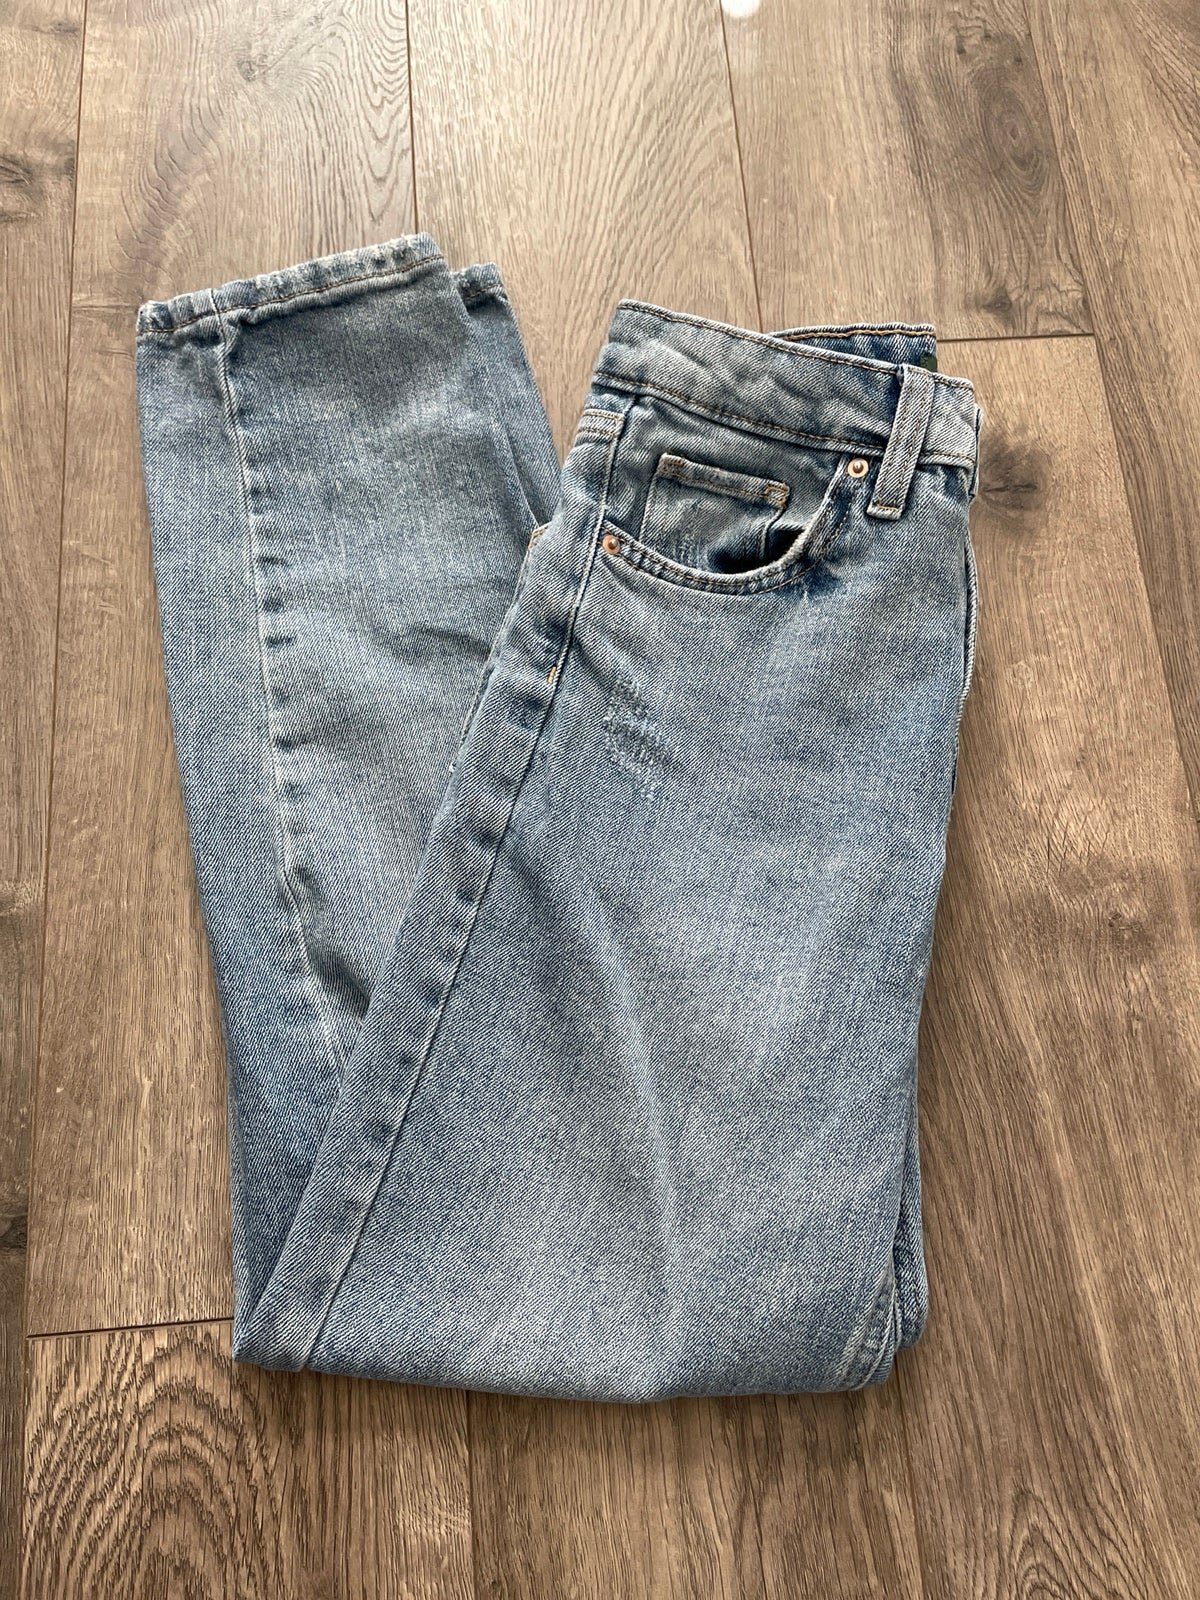 Nice Wild fable jeans iRrVAO7uH Store Online